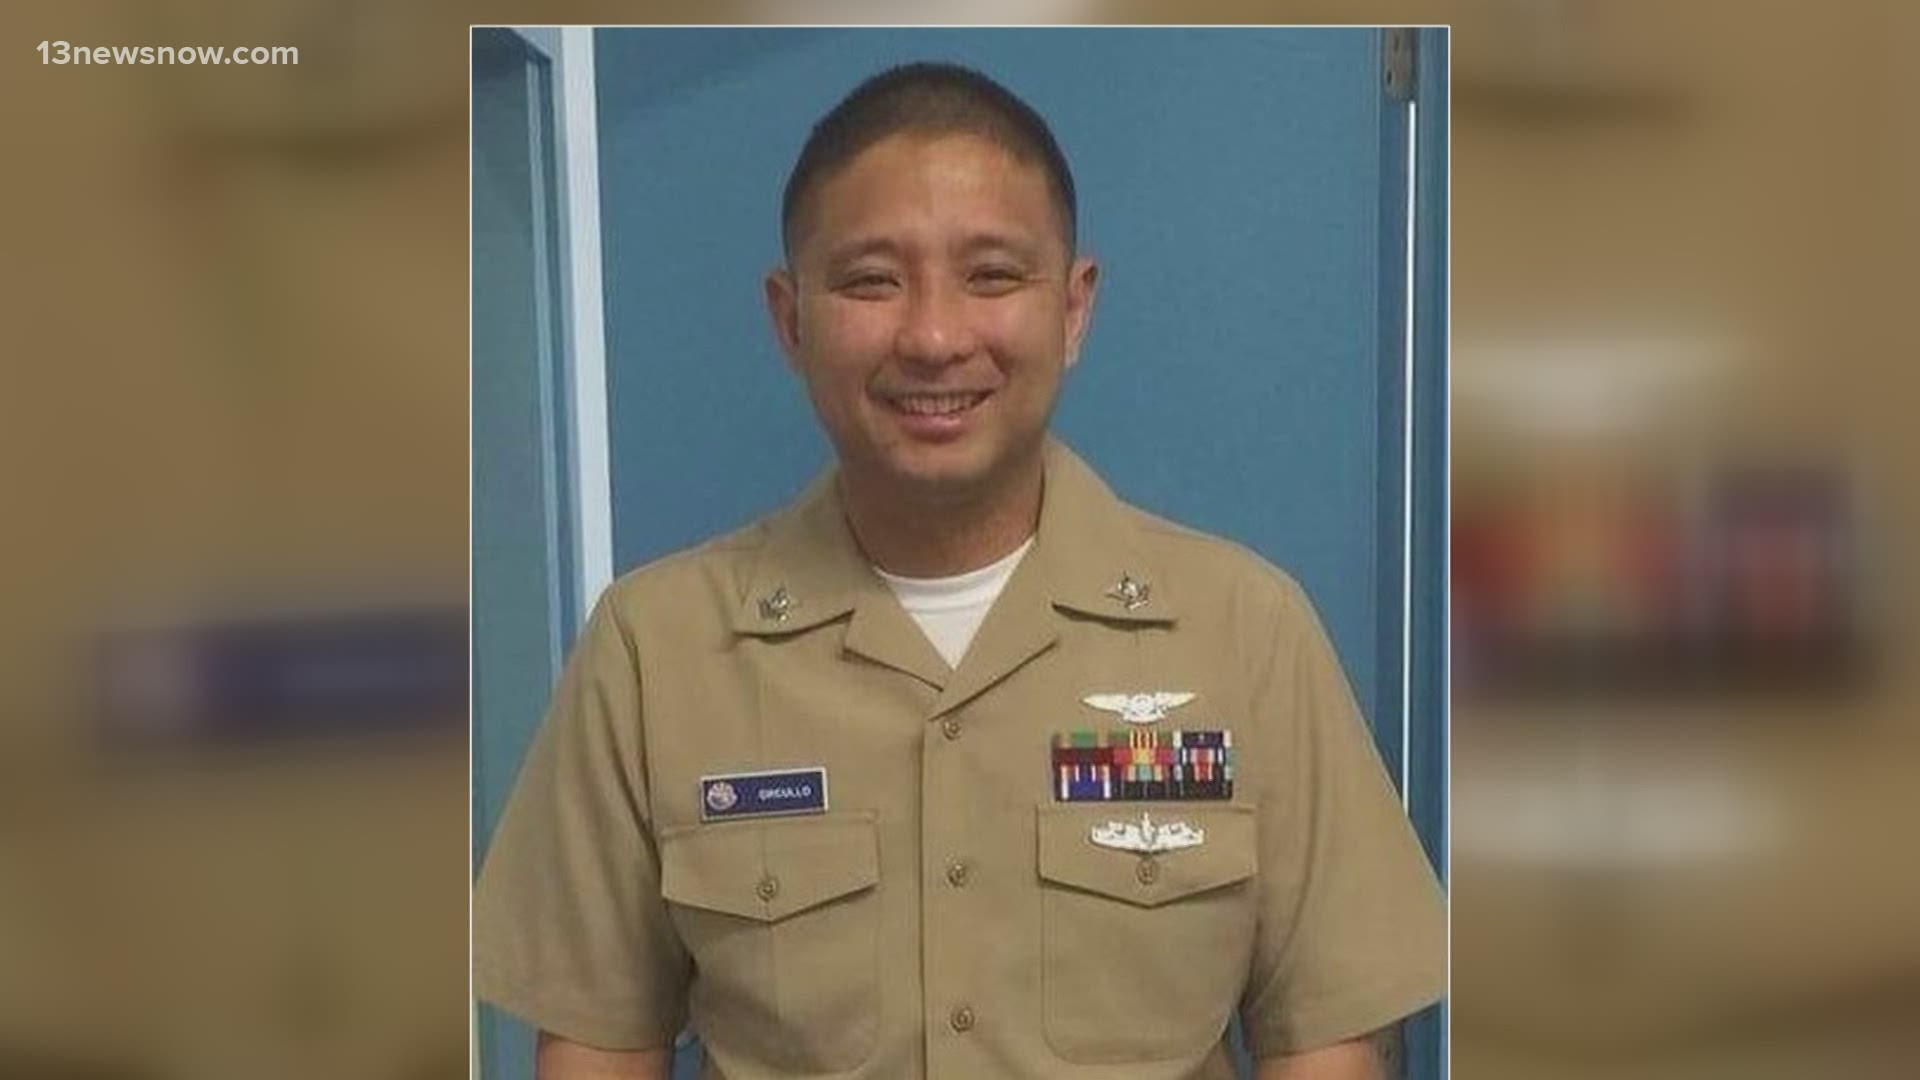 The U.S. Navy says Marcglenn Orcullo was the USS Wasp sailor who died from COVID-19 complications. He was 42 years old.